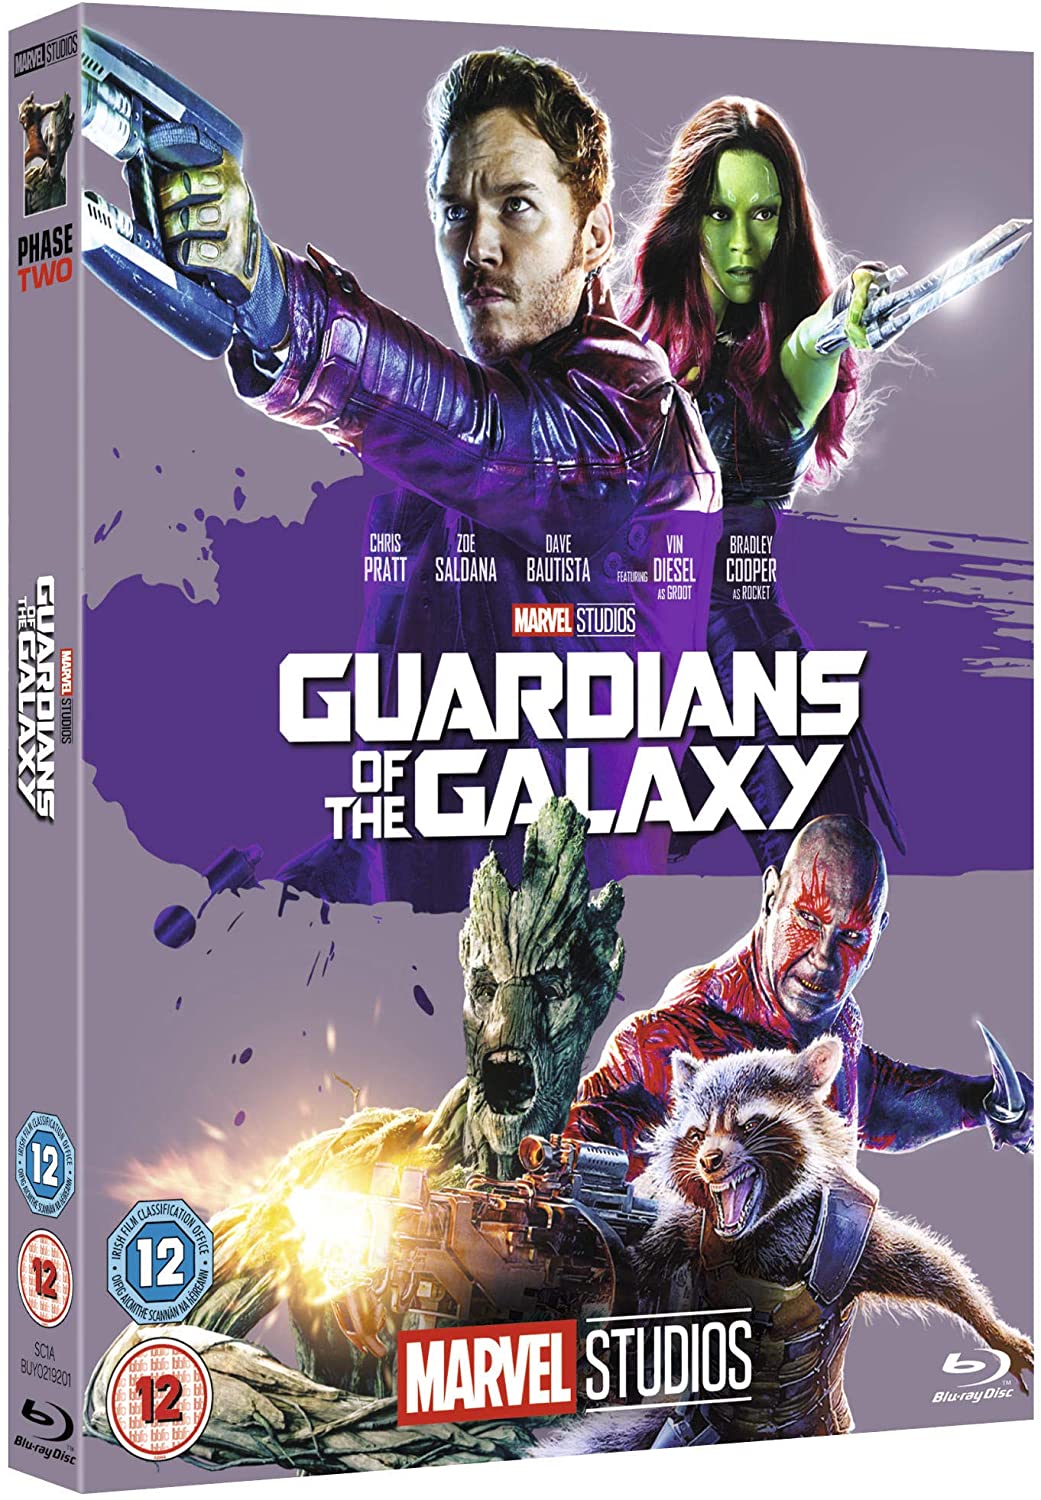 Guardians Of The Galaxy [Blu-ray]